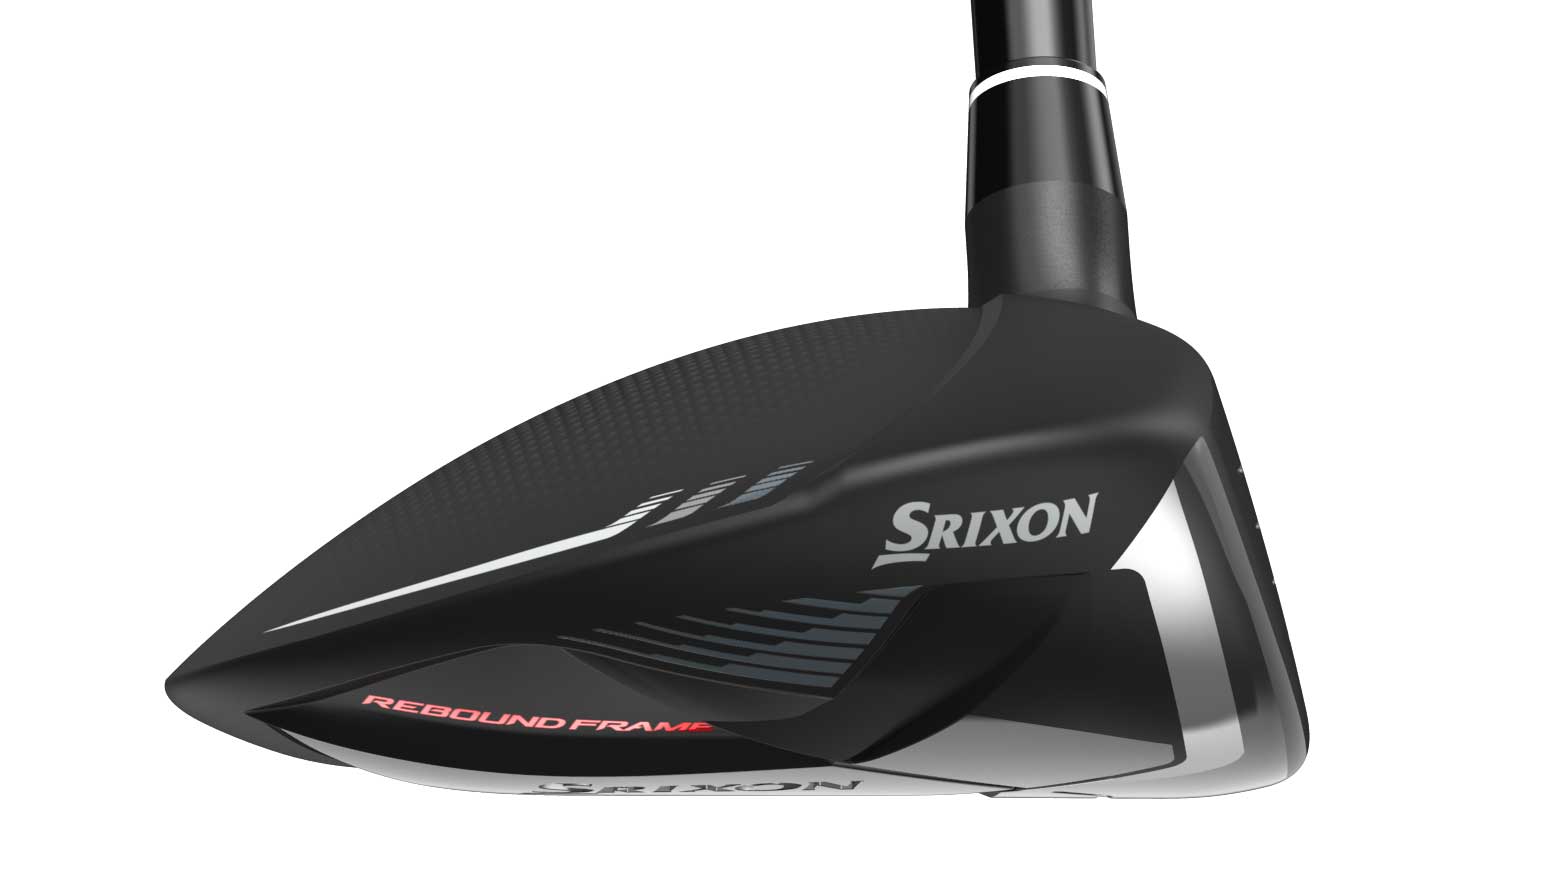 New Srixon golf clubs for 2023 (drivers, irons, woods, hybrids 